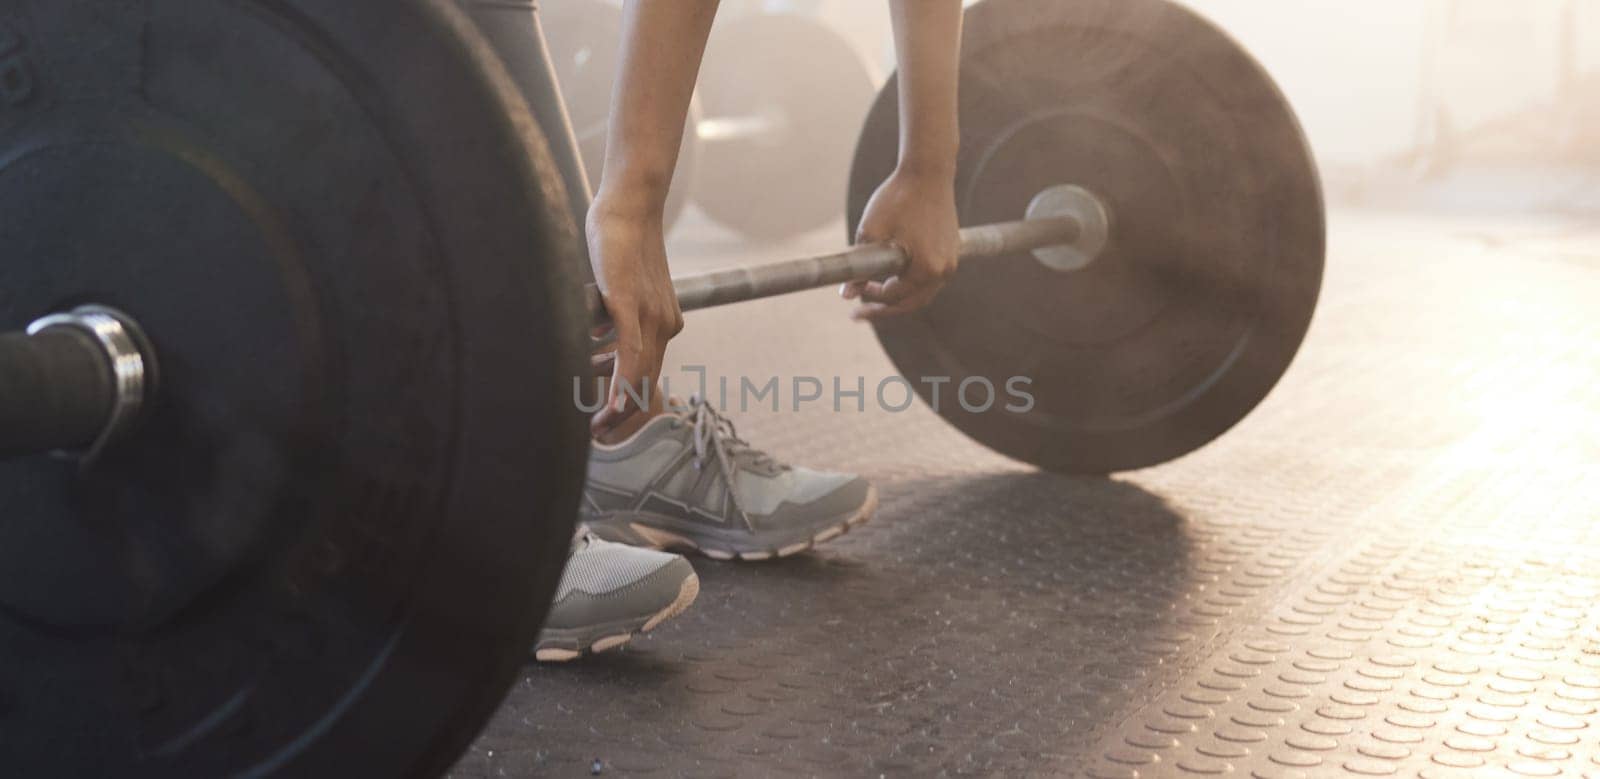 Fitness, woman in gym and barbell for weightlifting, power and muscle with closeup on equipment at sports club. Balance, strength and female bodybuilder lifting weights and training with health goals.